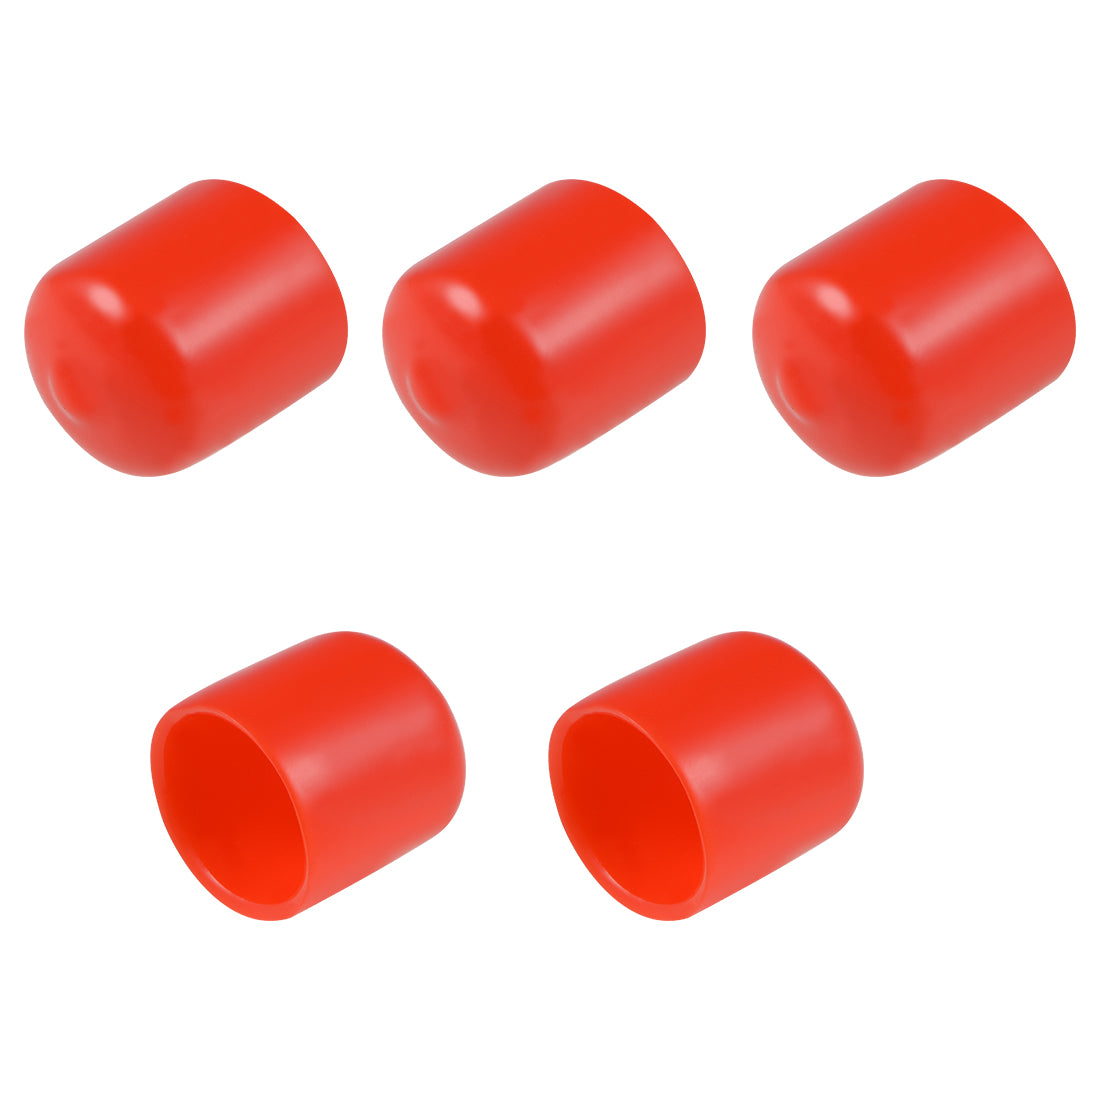 uxcell Uxcell Screw Thread Protector, 21mm ID Round End Cap Cover Red Tube Caps 5pcs